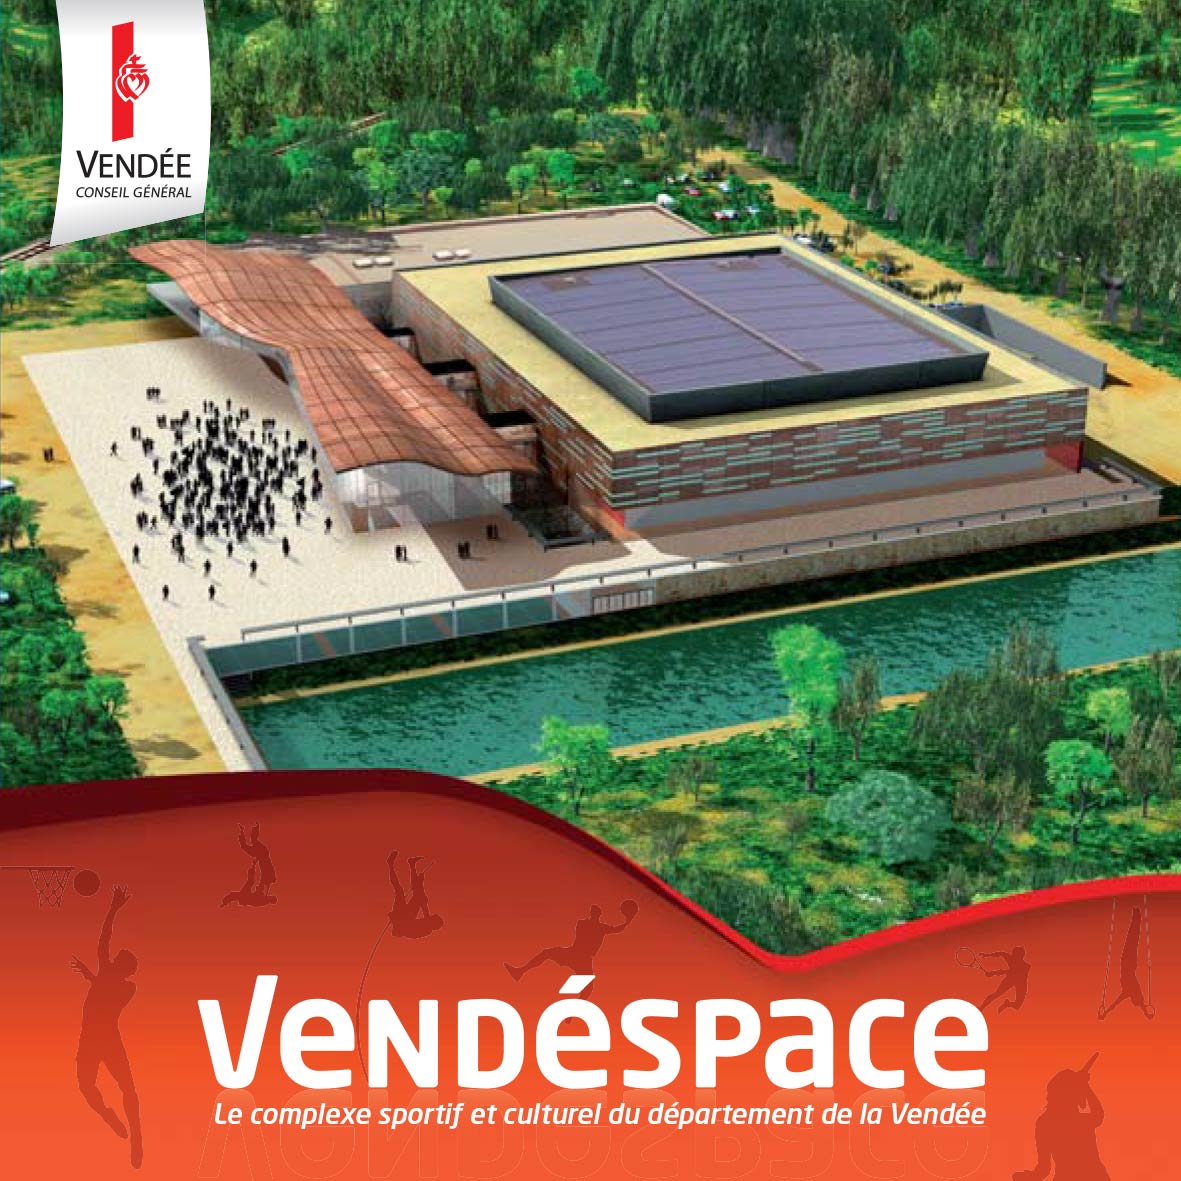 The Vendespace